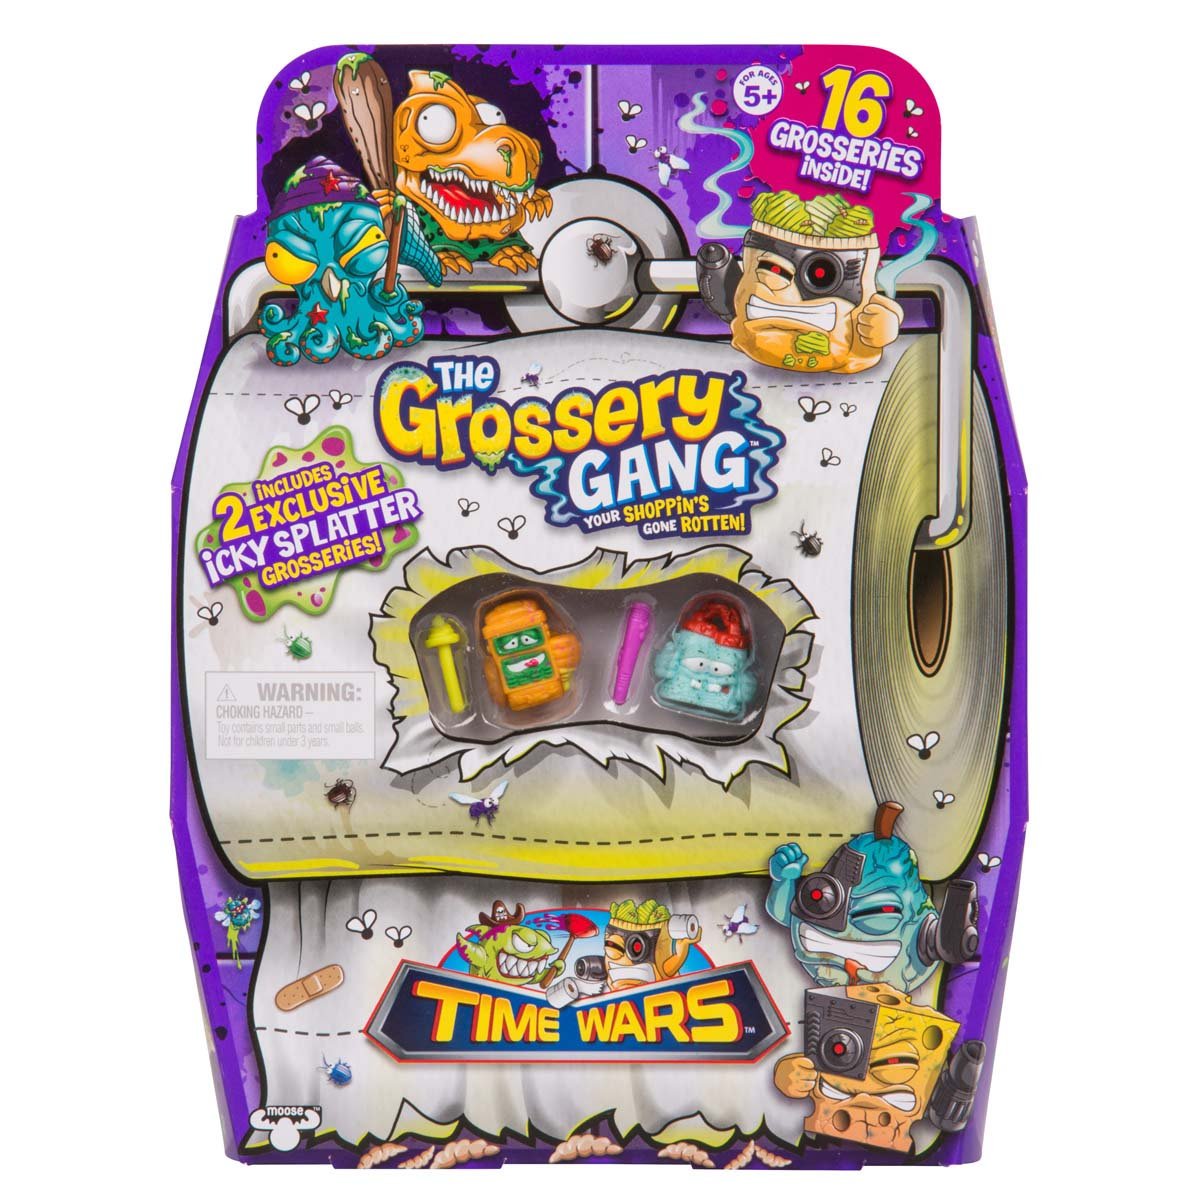 The Grossery Gang Super Size Pack Bandai